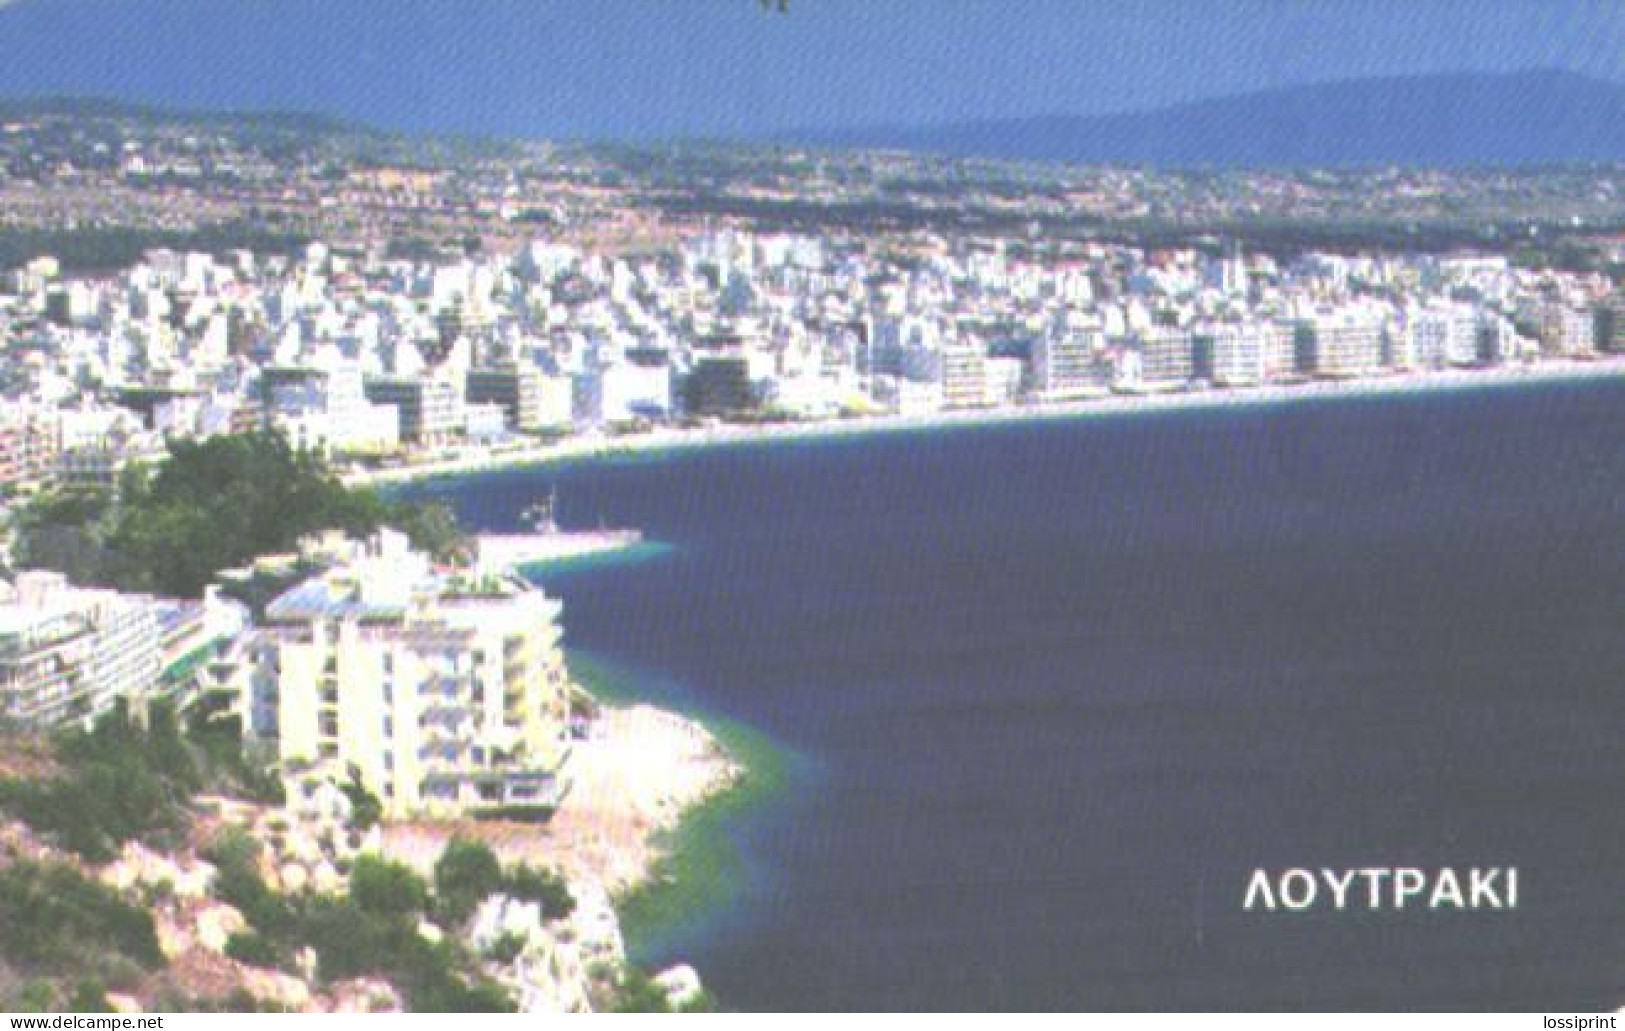 Greece:Used Phonecard, OTE, 100 Units, Hpaioy Lighthouse, Loytpaki Aerial View, 1996 - Phares